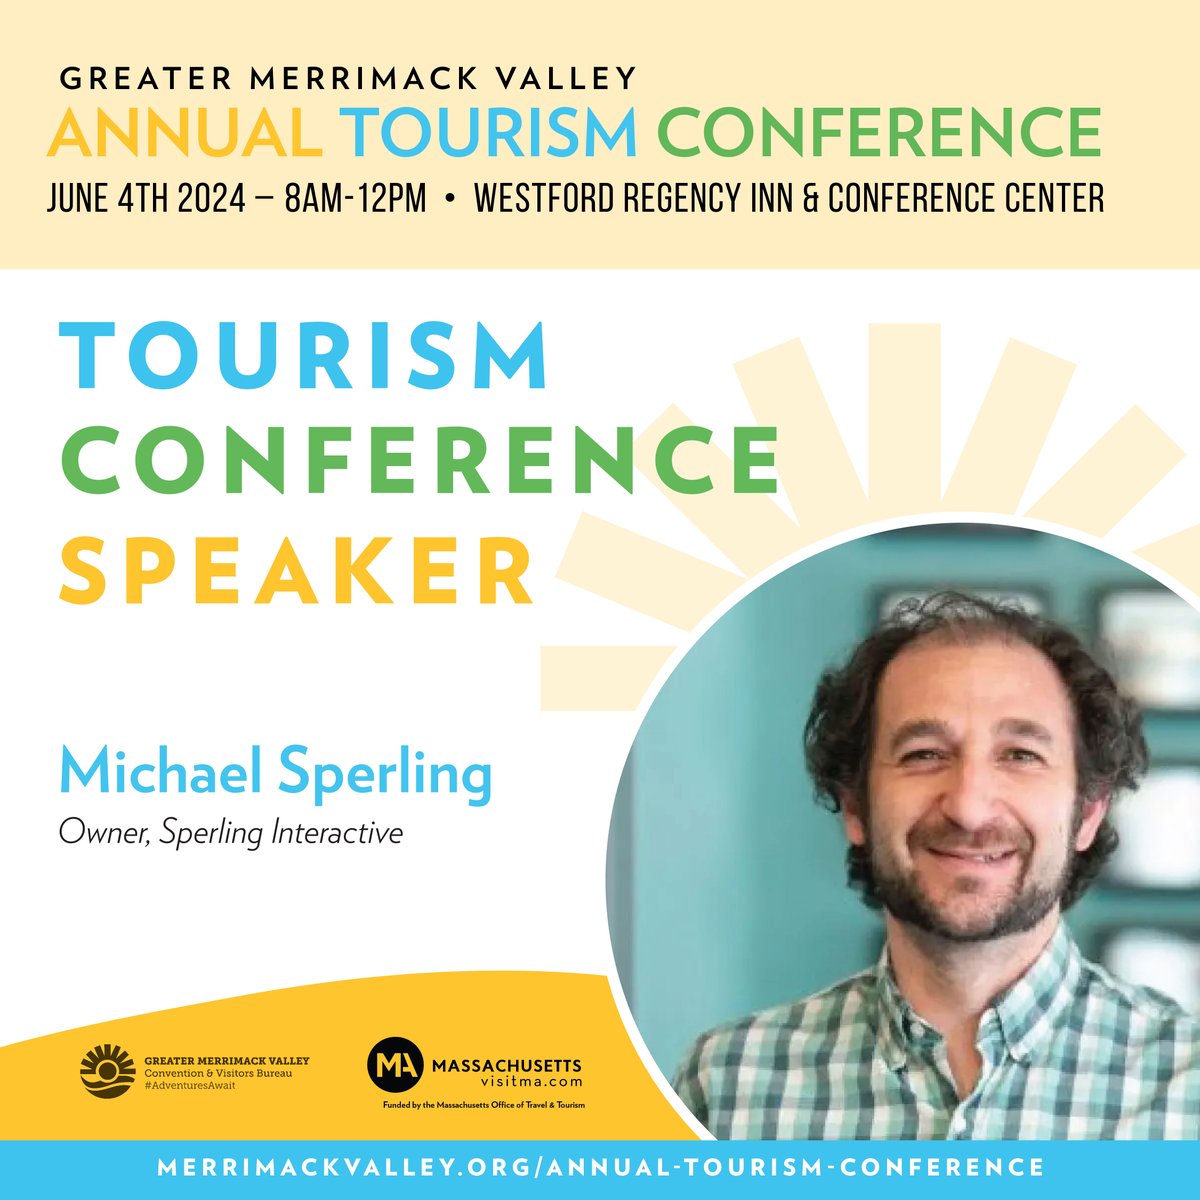 🌟 Spotlight on Michael Sperling! 🌟 We are delighted to feature Michael Sperling, Owner of @SperlingInterac, as a distinguished speaker at the 2024 Annual Tourism Conference. Join us Tuesday June 4th! merrimackvalley.org/annual-tourism… #MerrimackValley